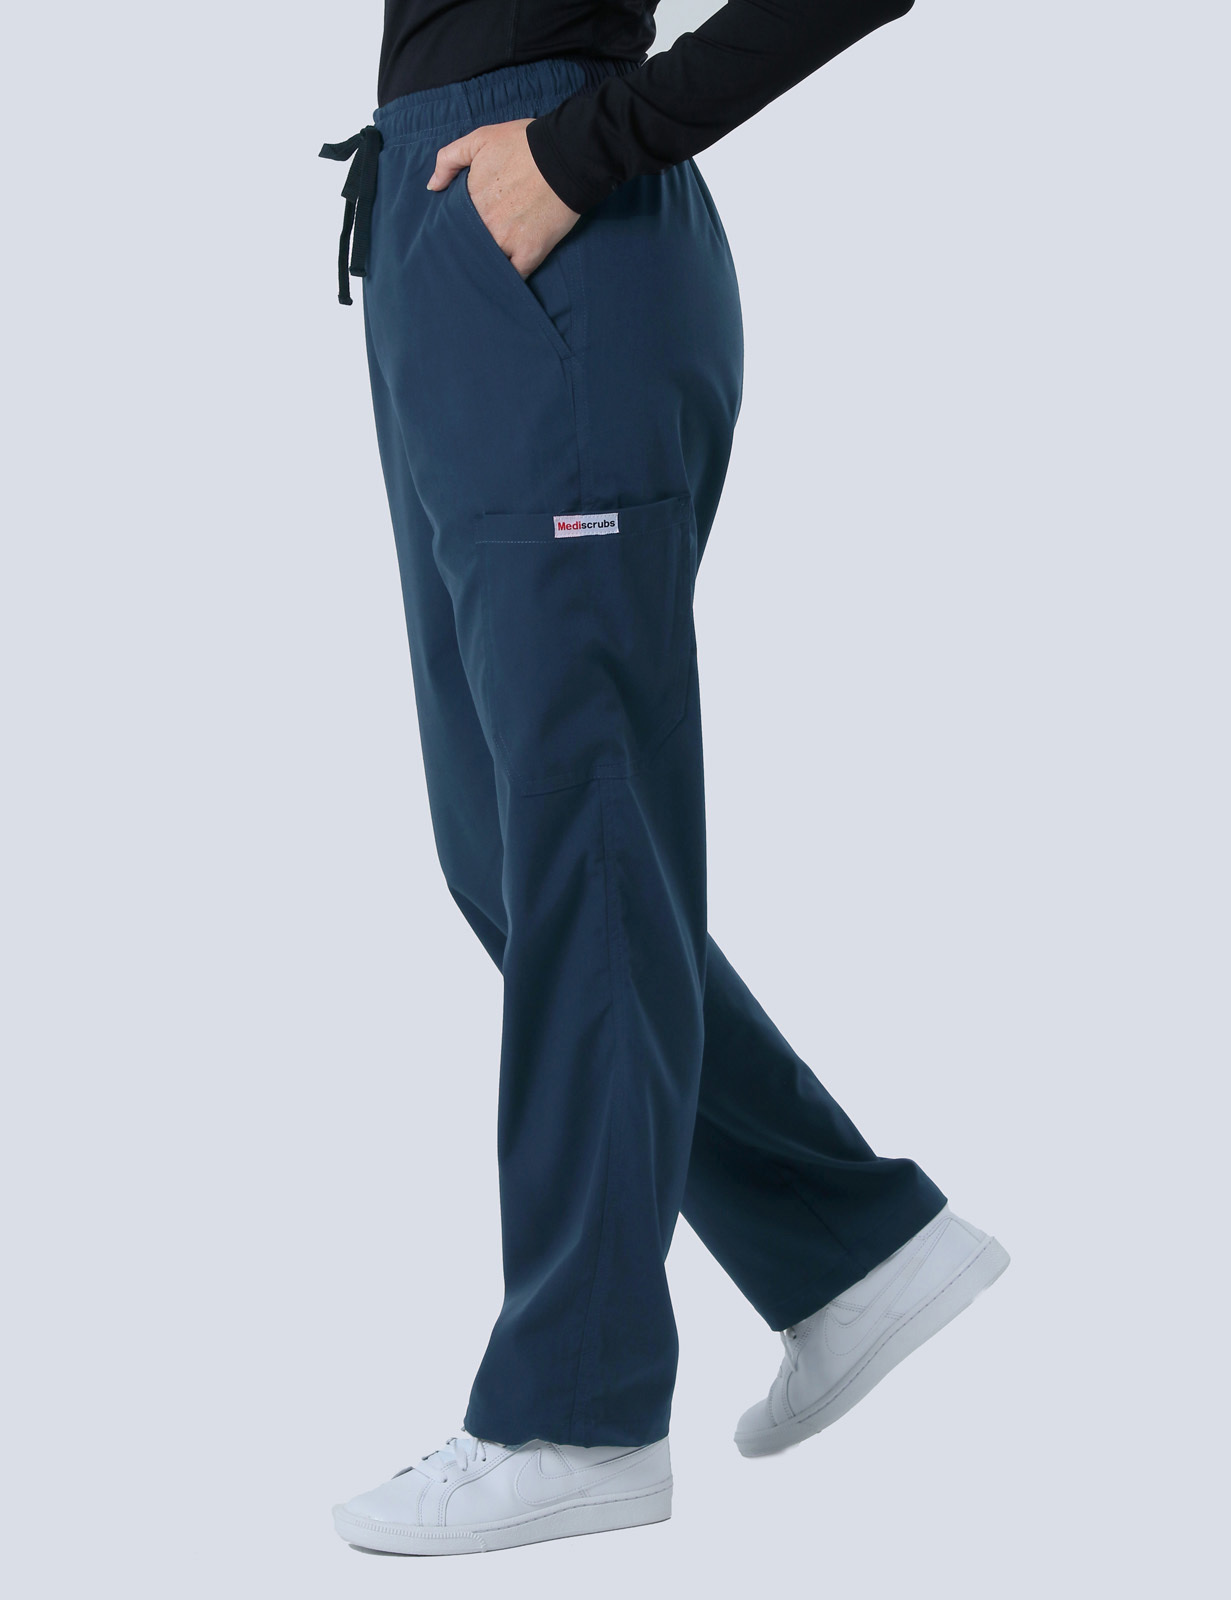 Peninsula Health Frankston - ICU ANUM (Women's Fit Solid Scrub Top and Cargo Pants in Navy incl Logos)